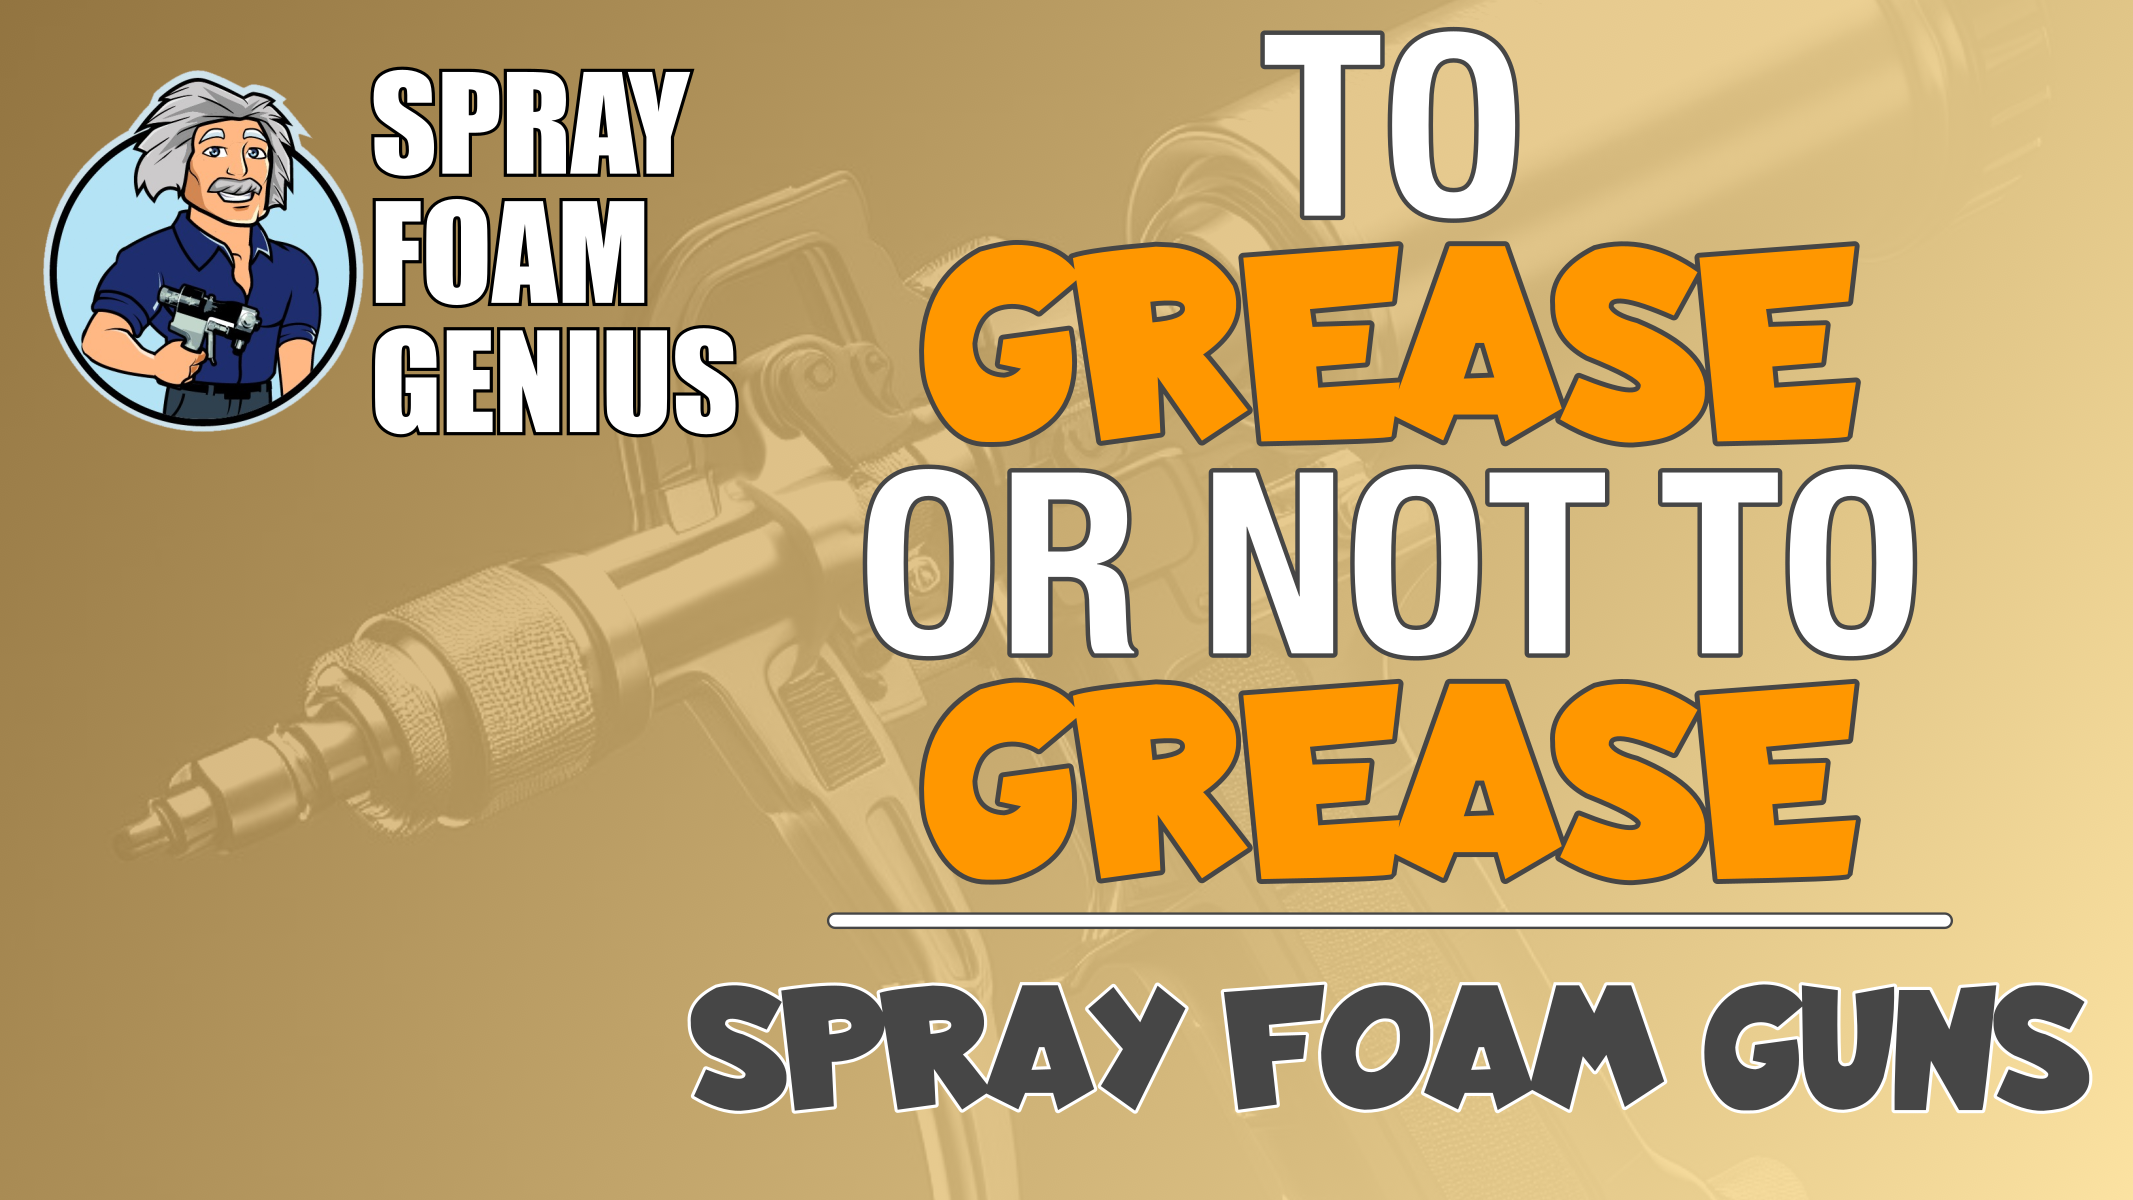 Grease or not to grease your spray foam insulation gun